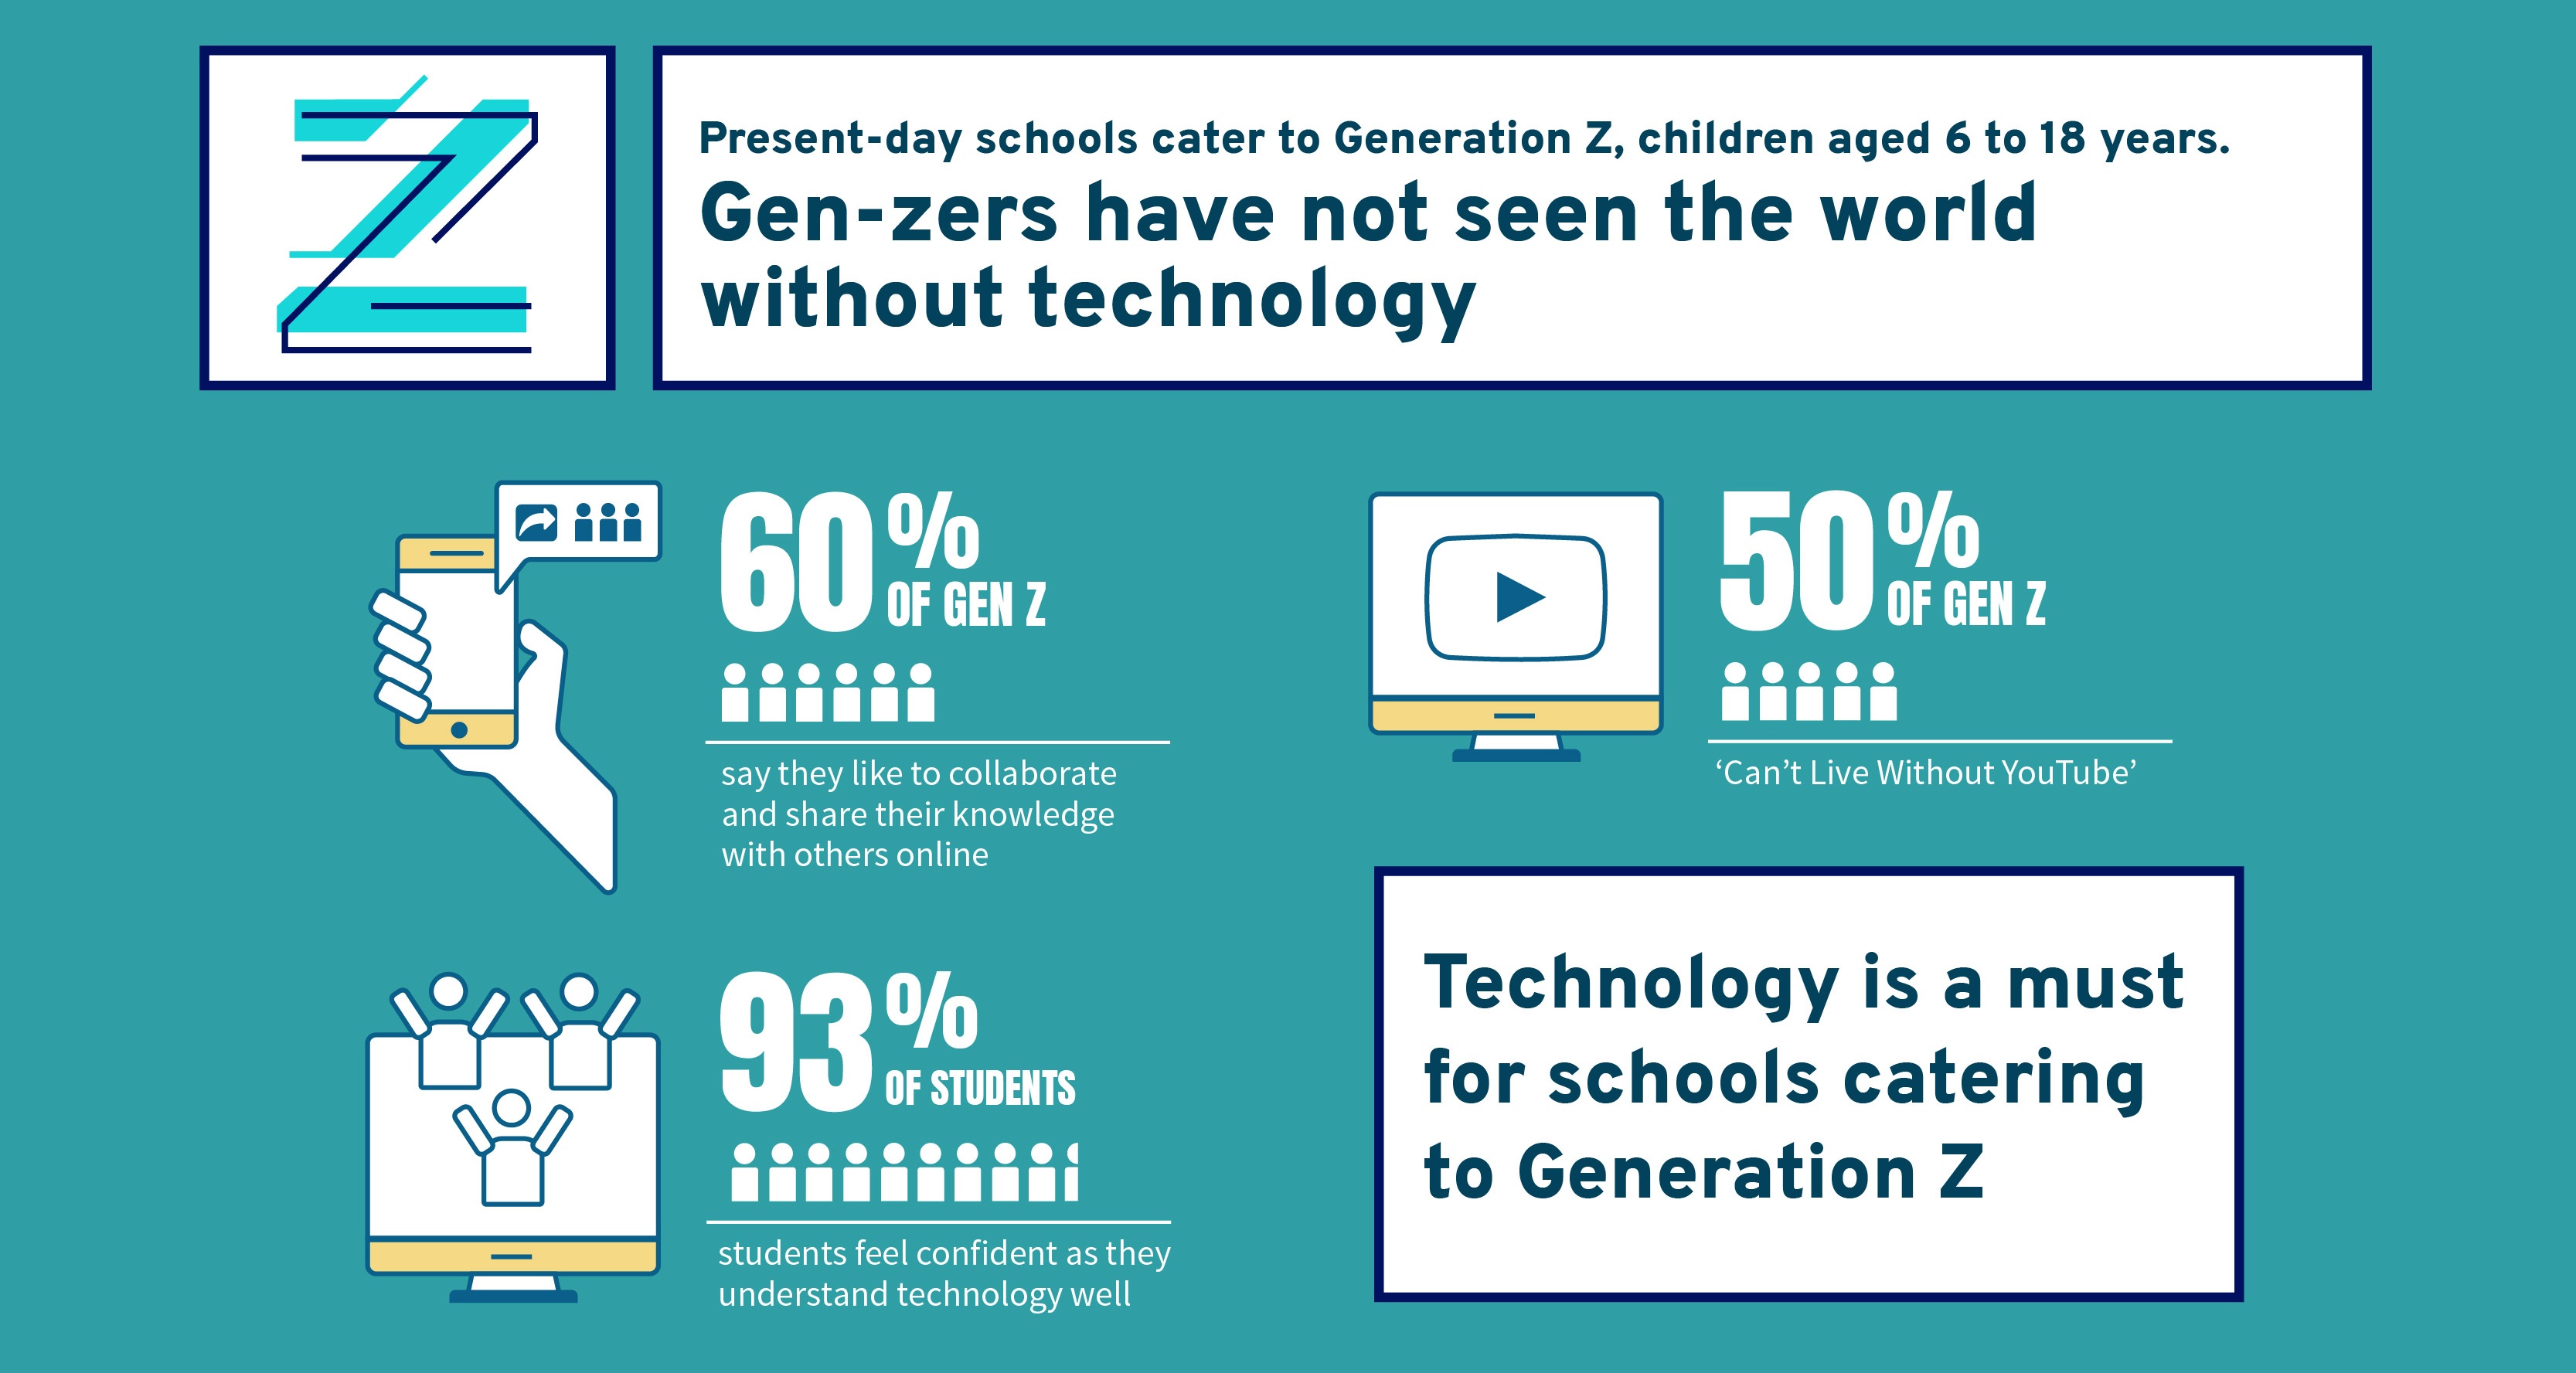 Why technology vital in process of Generation Z